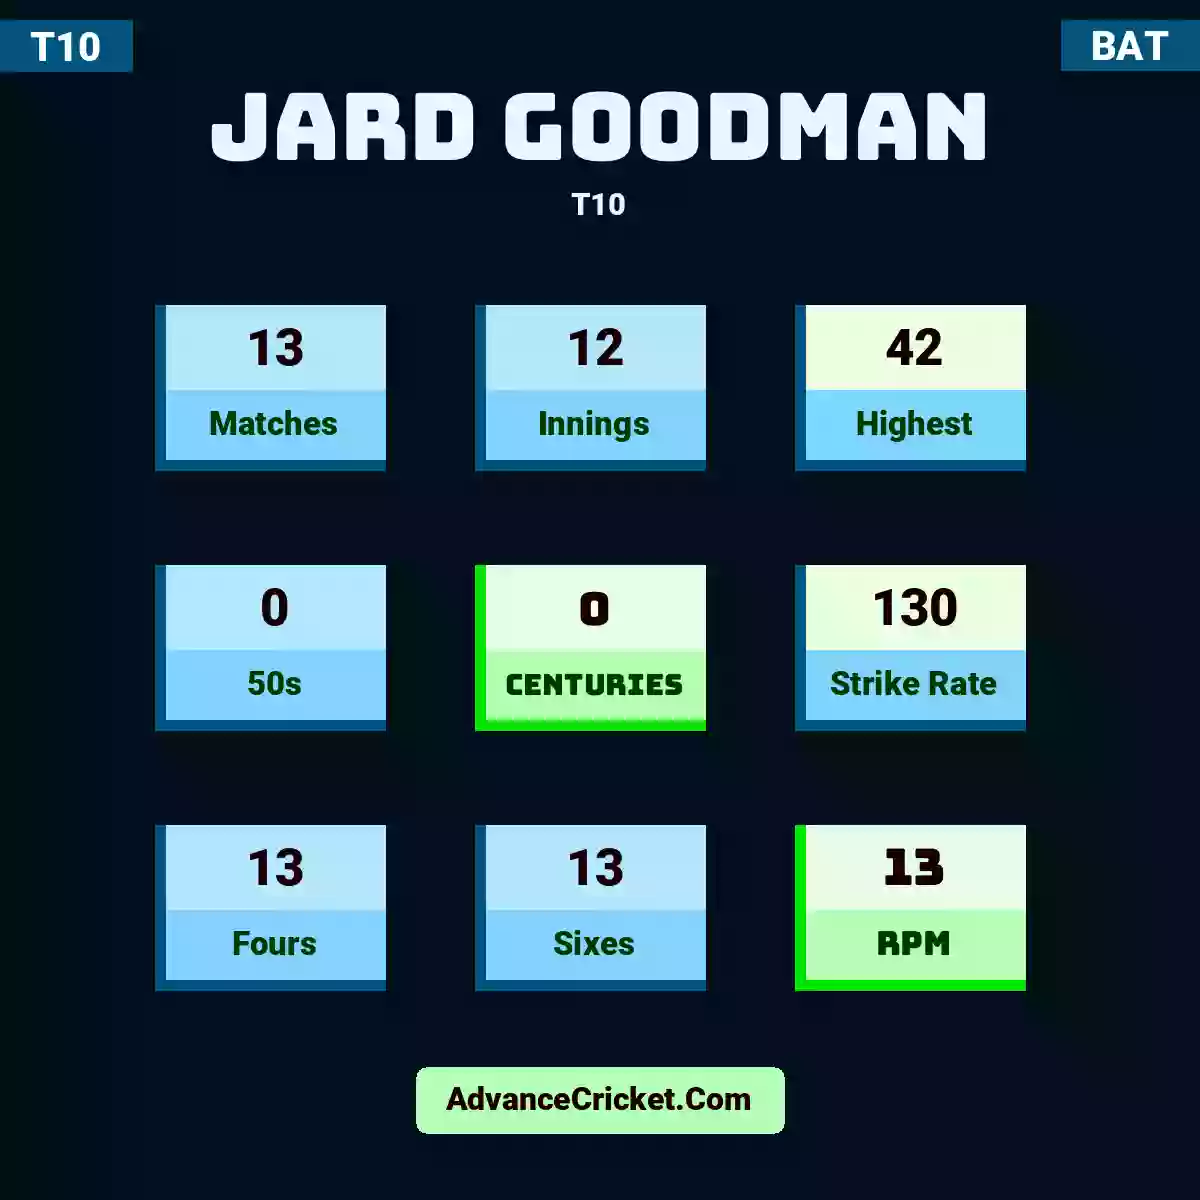 Jard Goodman T10 , Jard Goodman played 13 matches, scored 42 runs as highest, 0 half-centuries, and 0 centuries, with a strike rate of 130. J.Goodman hit 13 fours and 13 sixes, with an RPM of 13.